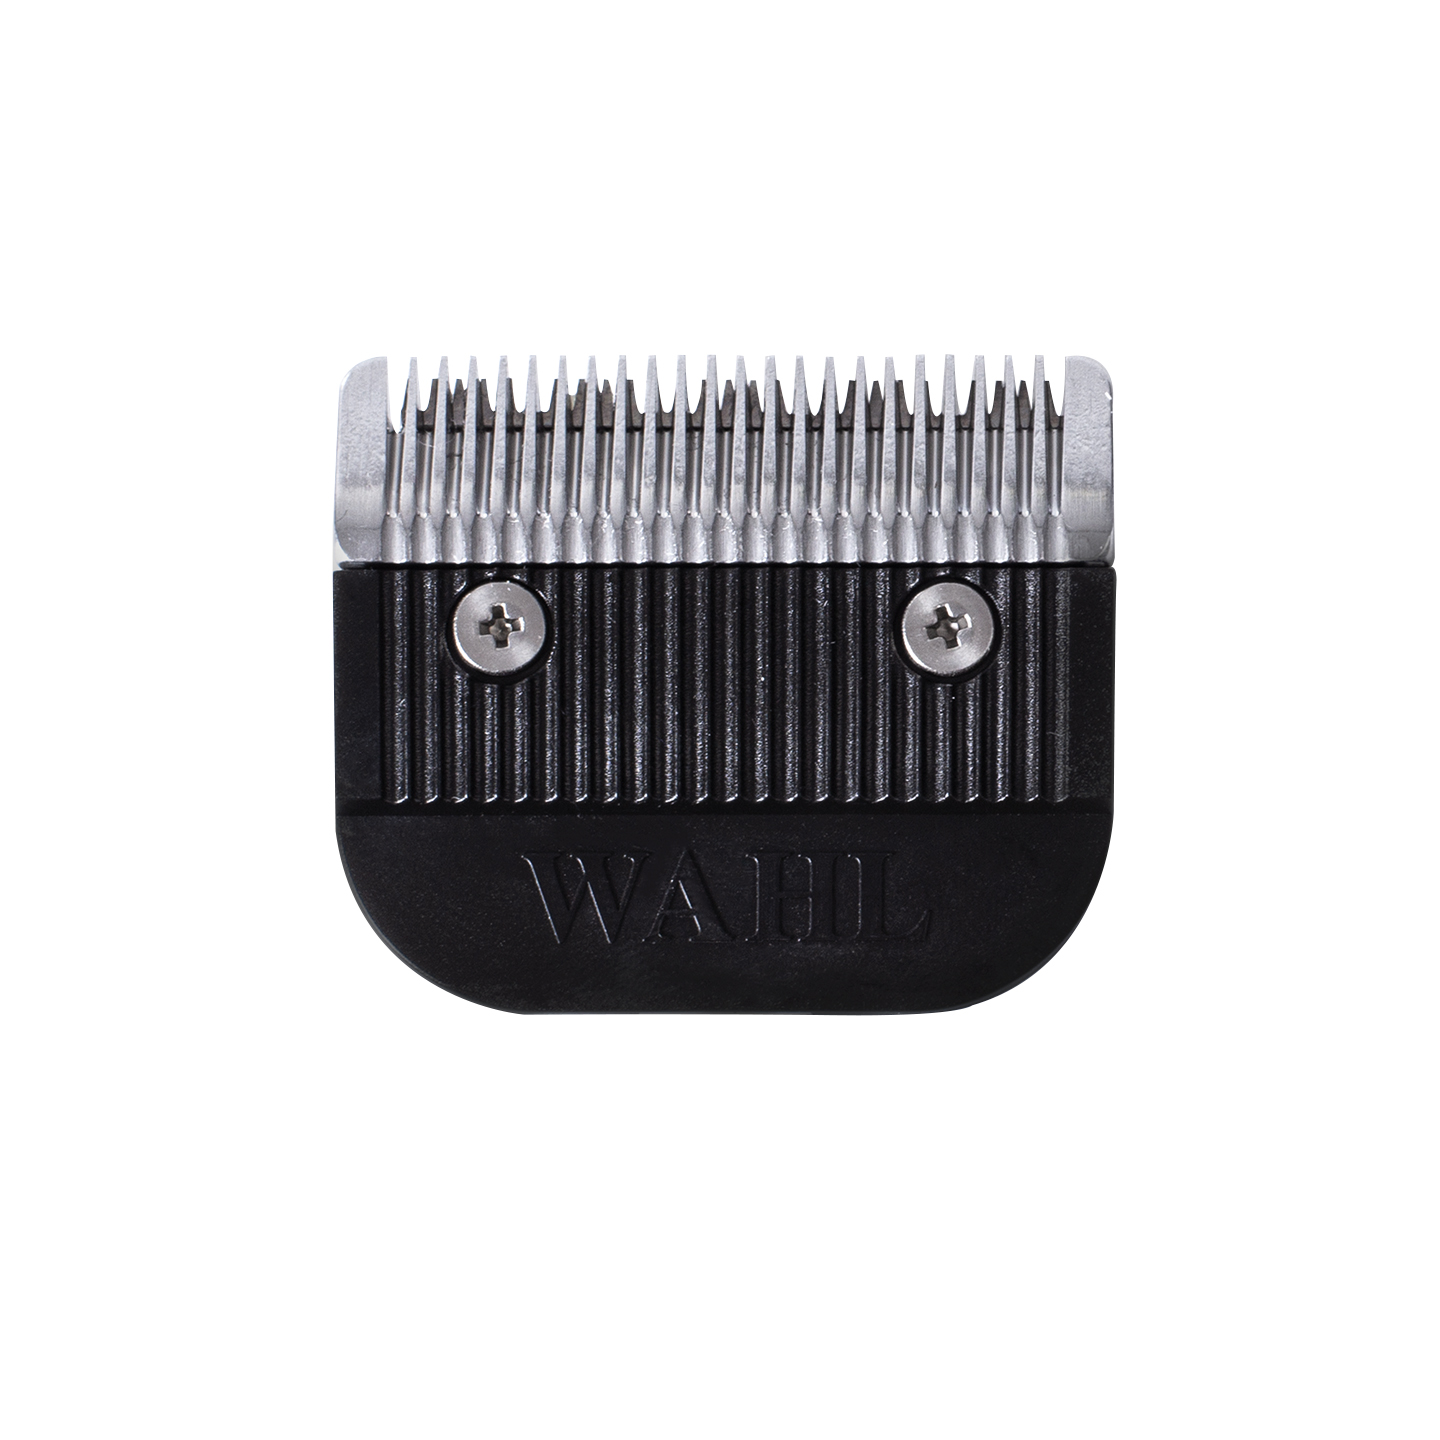 wahl model 9649 replacement head